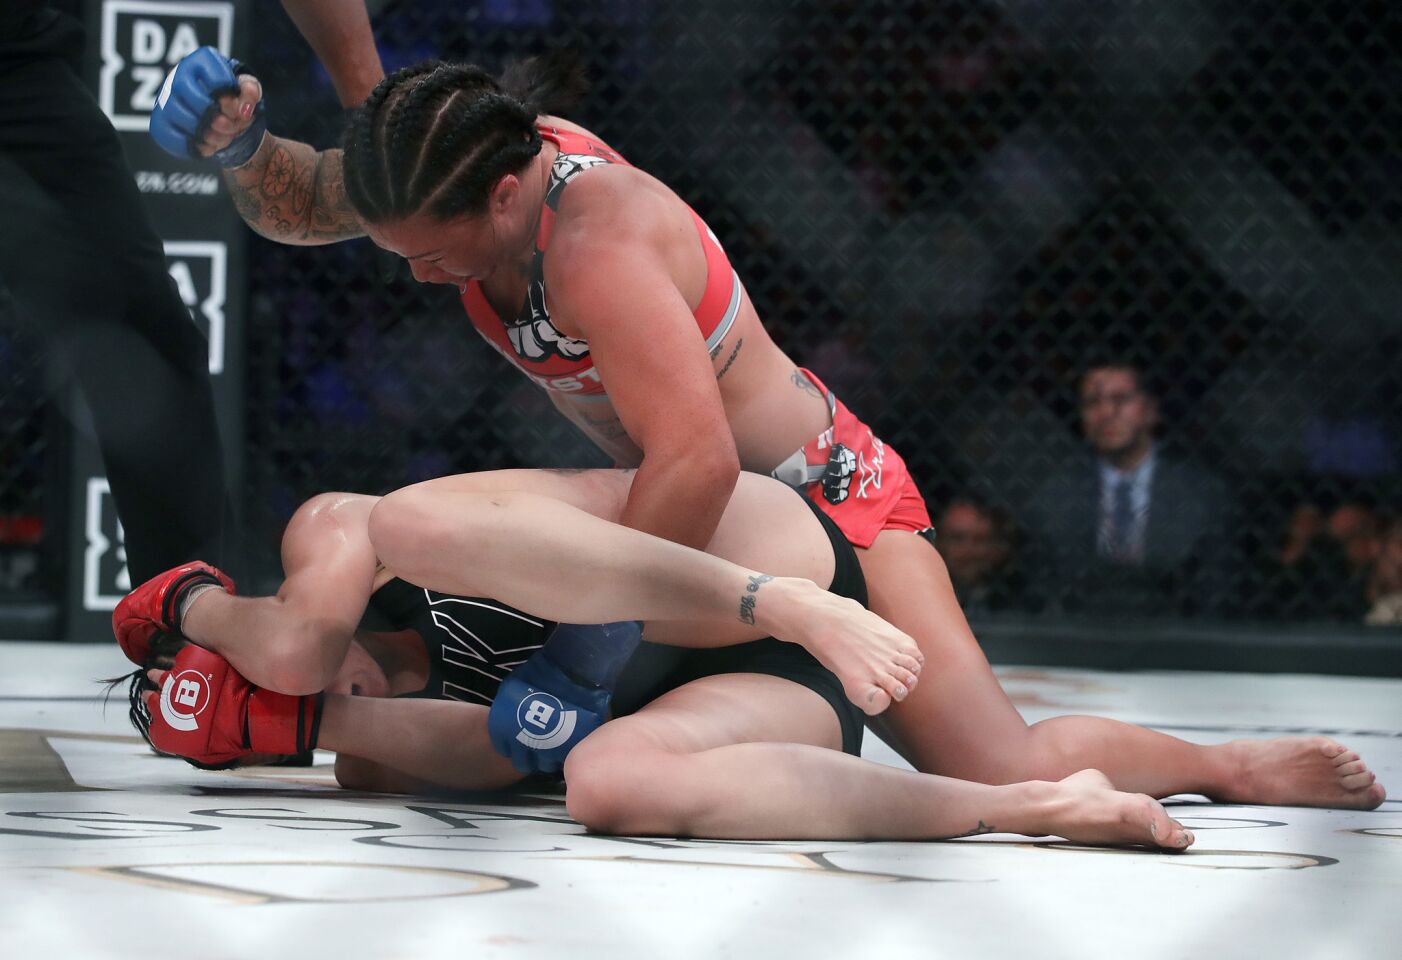 Arlene Blencowe, top, punches Amber Leibrock during a featherweight mixed martial arts fight at Bellator 206 in San Jose, Calif., Saturday, Sept. 29, 2018. Blencowe won by knockout in the third round. (AP Photo/Jeff Chiu)